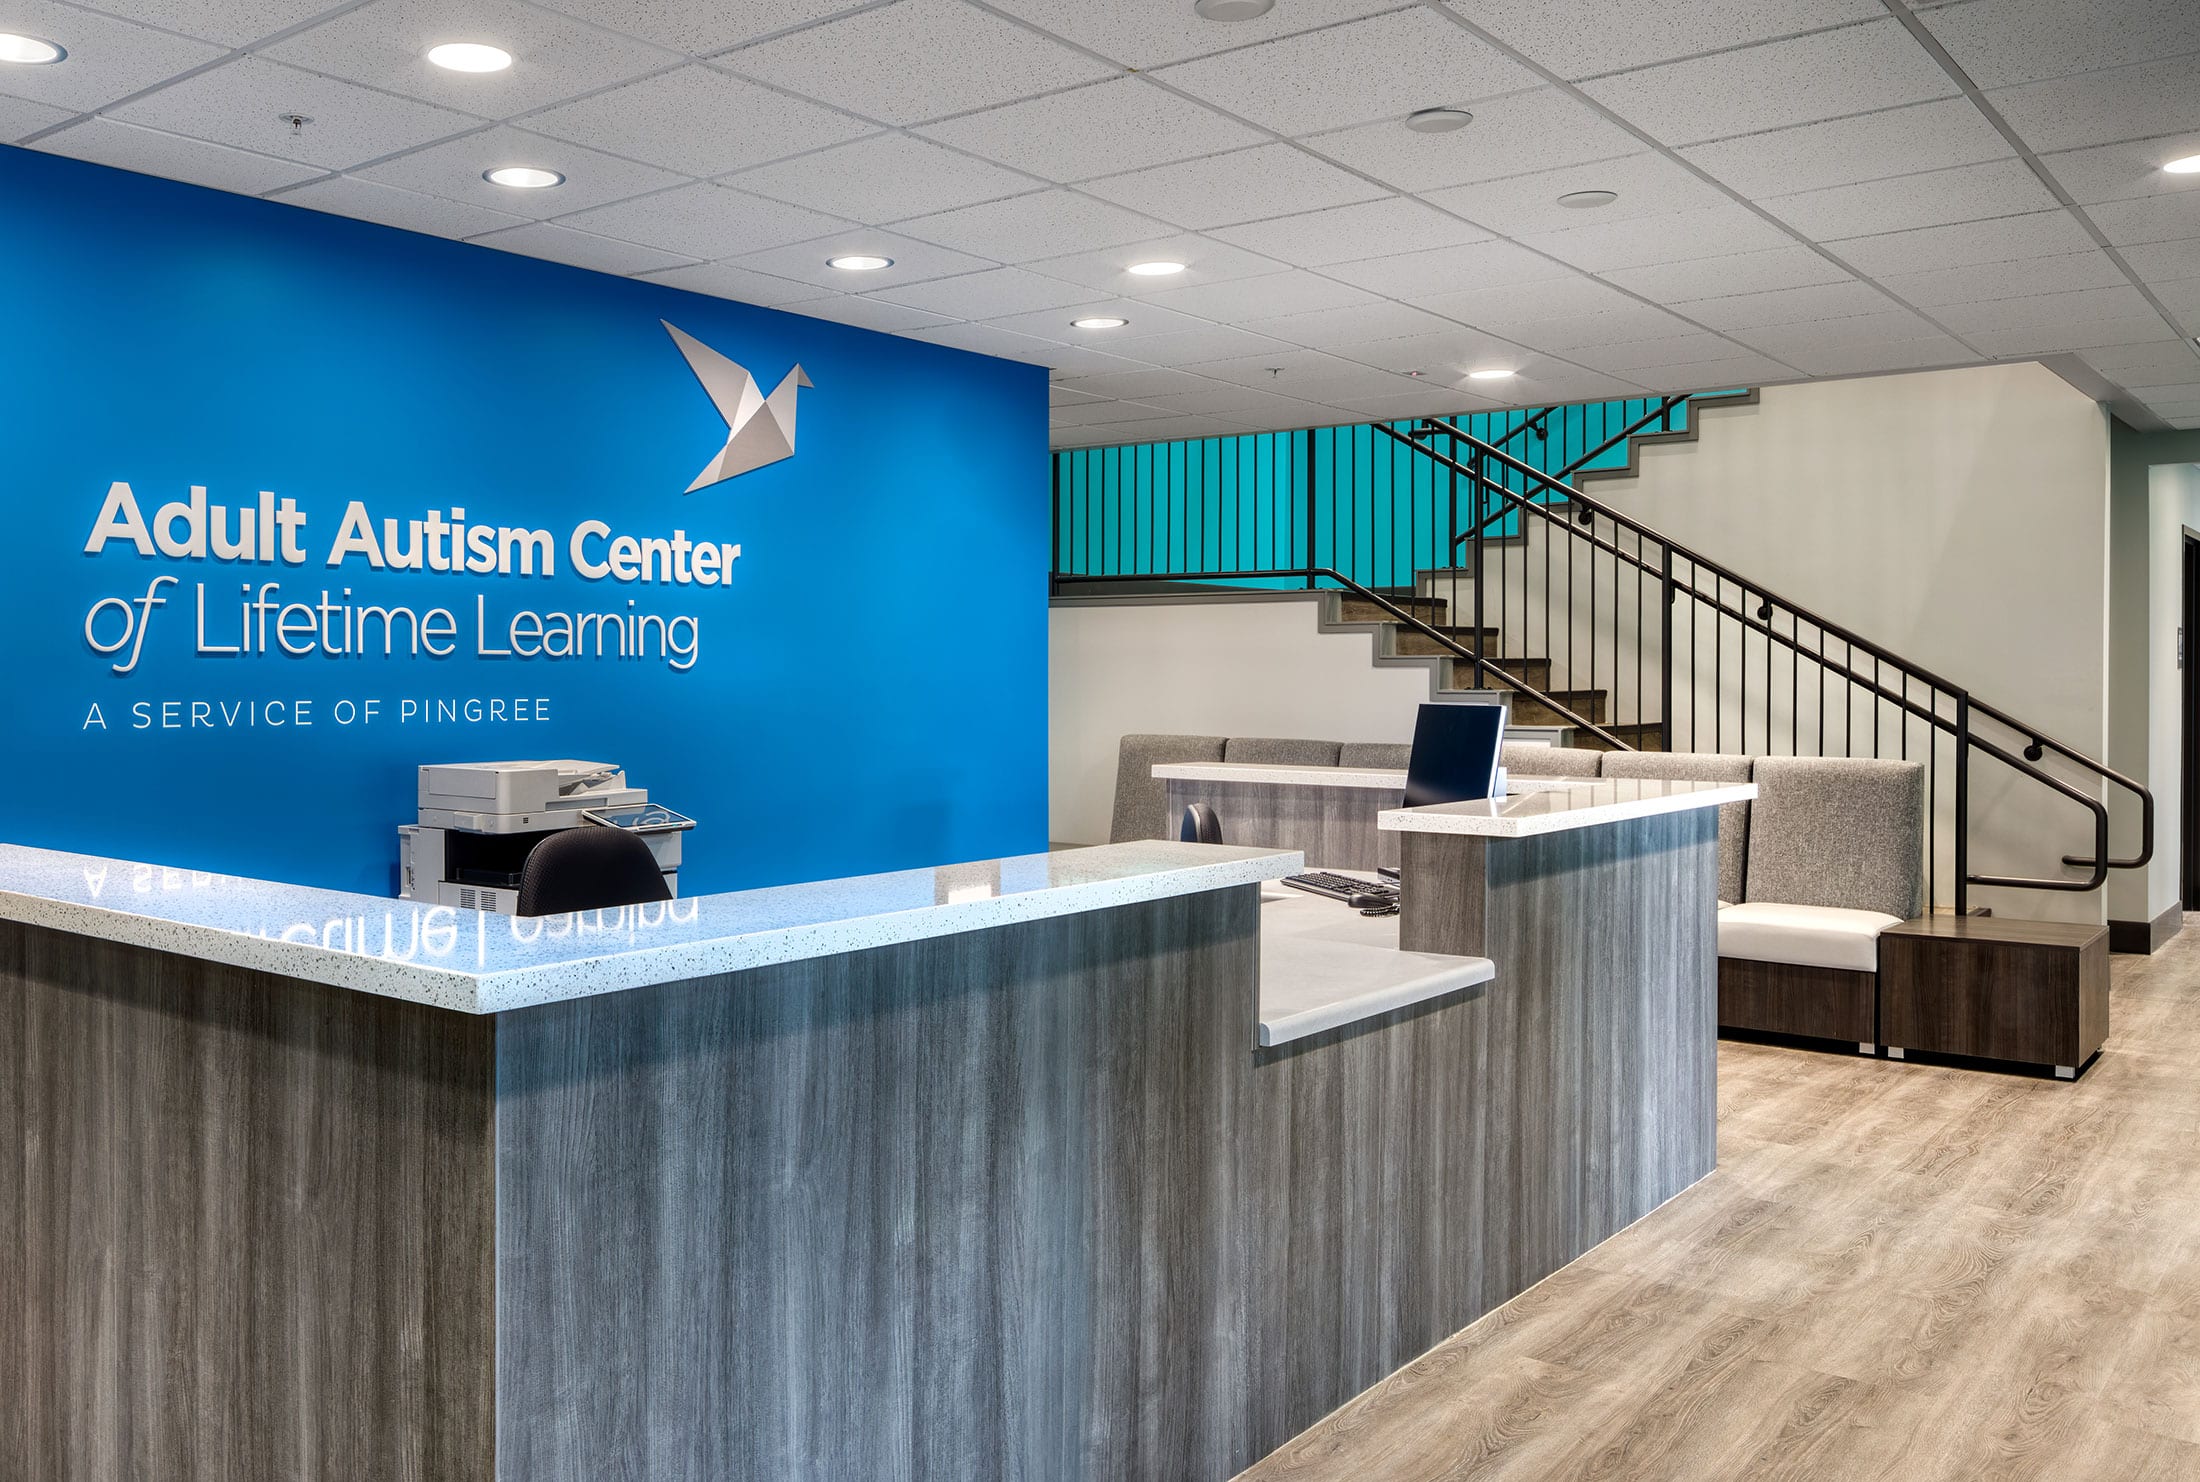 Interior of front desk of Adult Autism Center